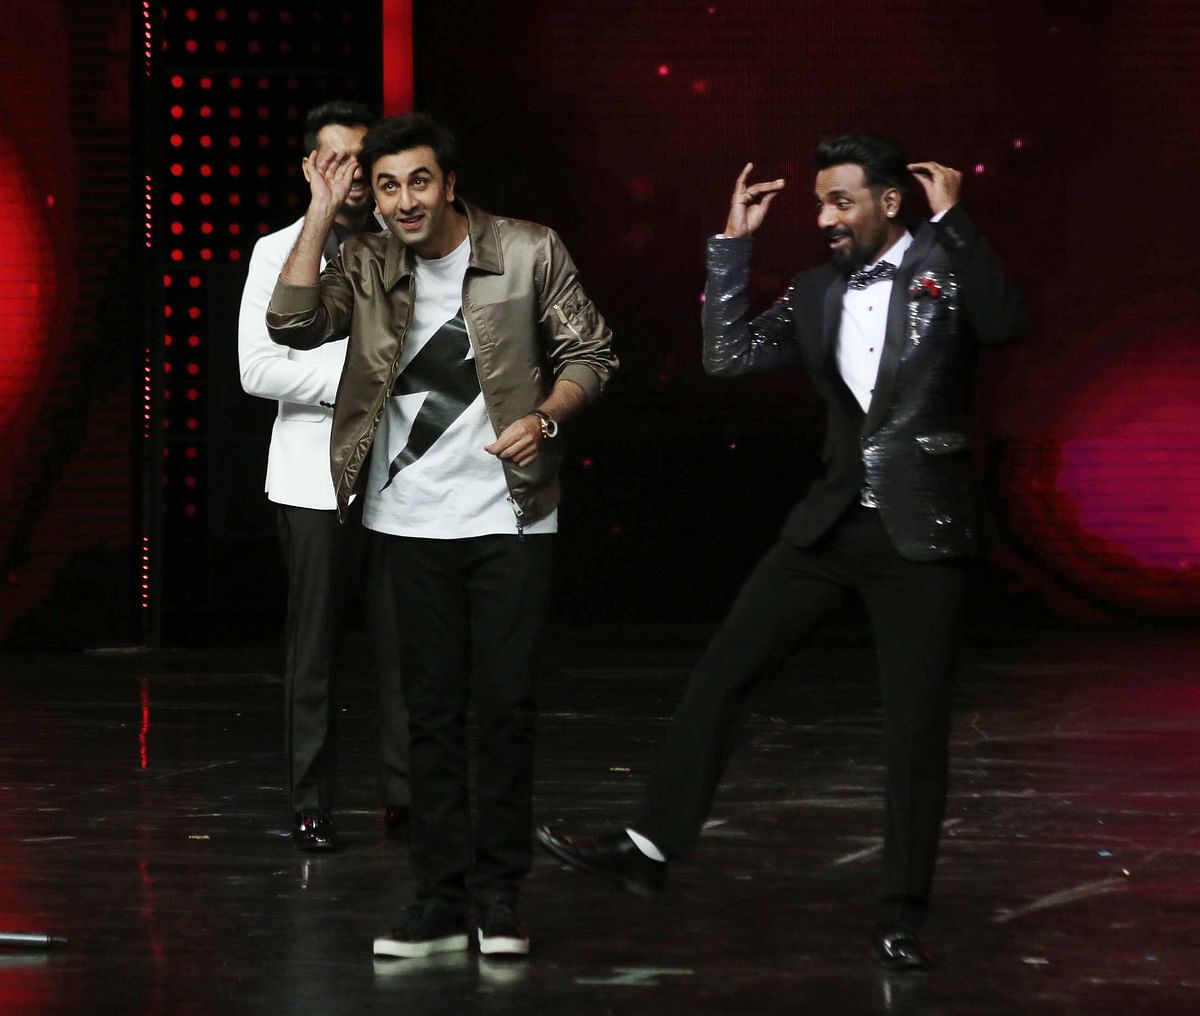 Ranbir Kapoor danced away at a dance reality show, Sofia Hayat is back (or not) & Angelina may be in hiding?